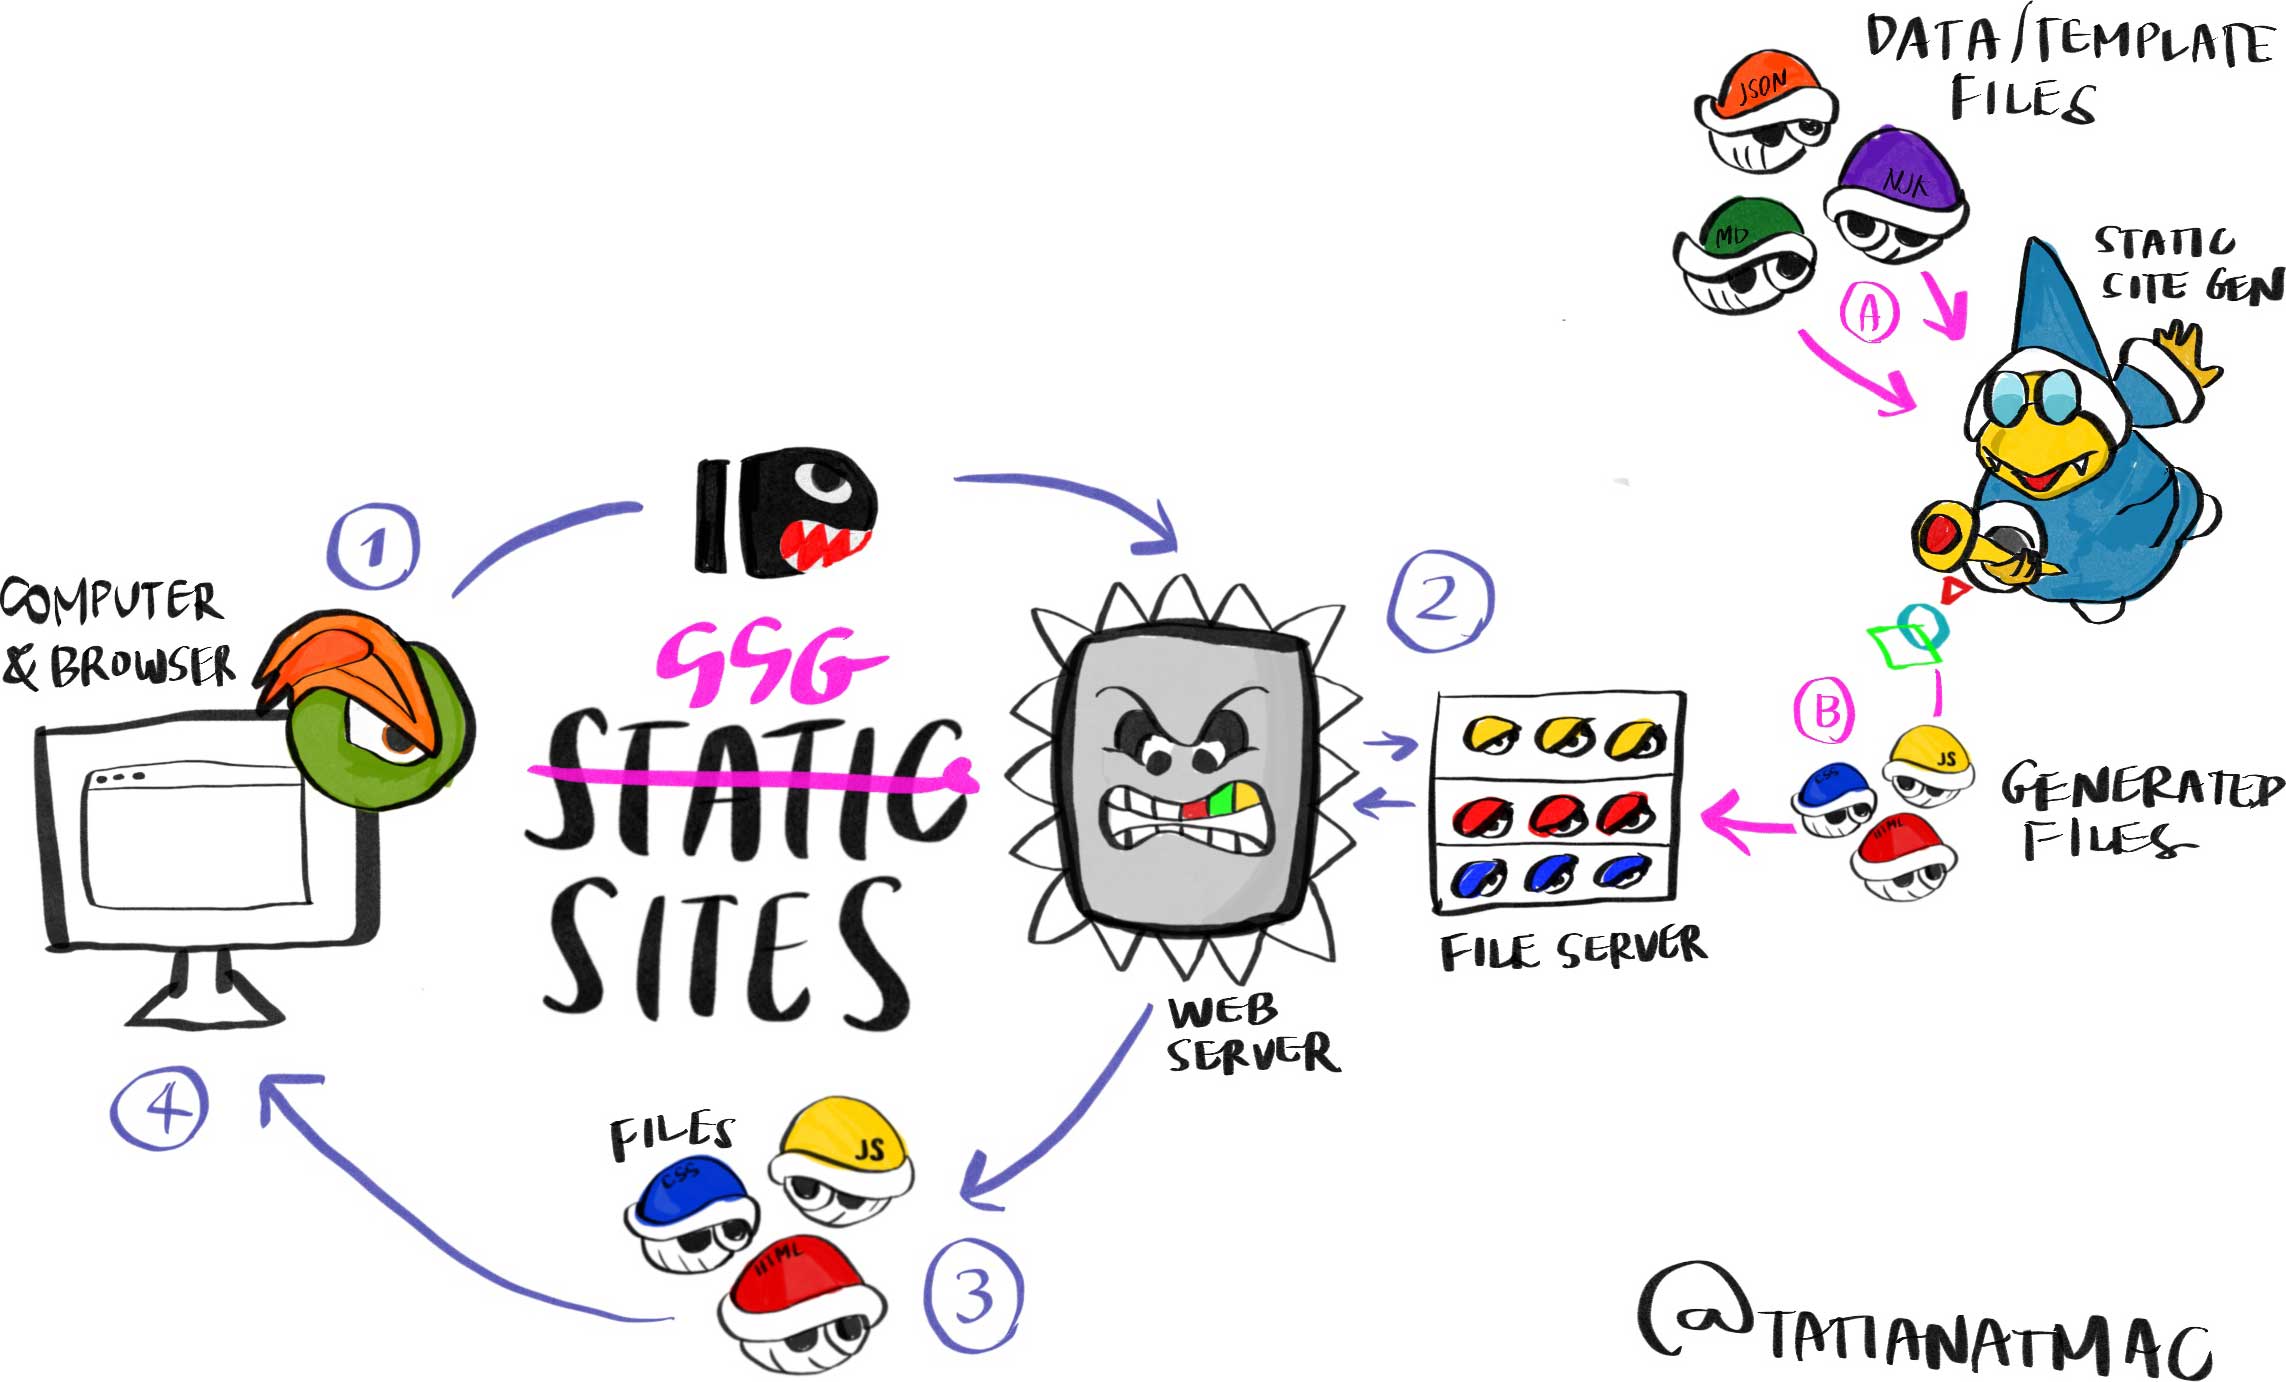 Diagram of SSG sites where all elements are from Super Mario to illustrate how static sites are generated. Computer and browser (browser logo is Bowser's eye and eyebrow done in Firefox/Edge style) sends a request (Bullet Bill) to the web server (Thomp). Simultaneously, data/template files (Koopas as Markdown, JSON, and Nunjucks files) are sent to the static site generator (Magic Koopa) who sends generated static files (Koopas dressed as HTML, CSS, and JS files) back to the web server. The web server sends those files to the computer.